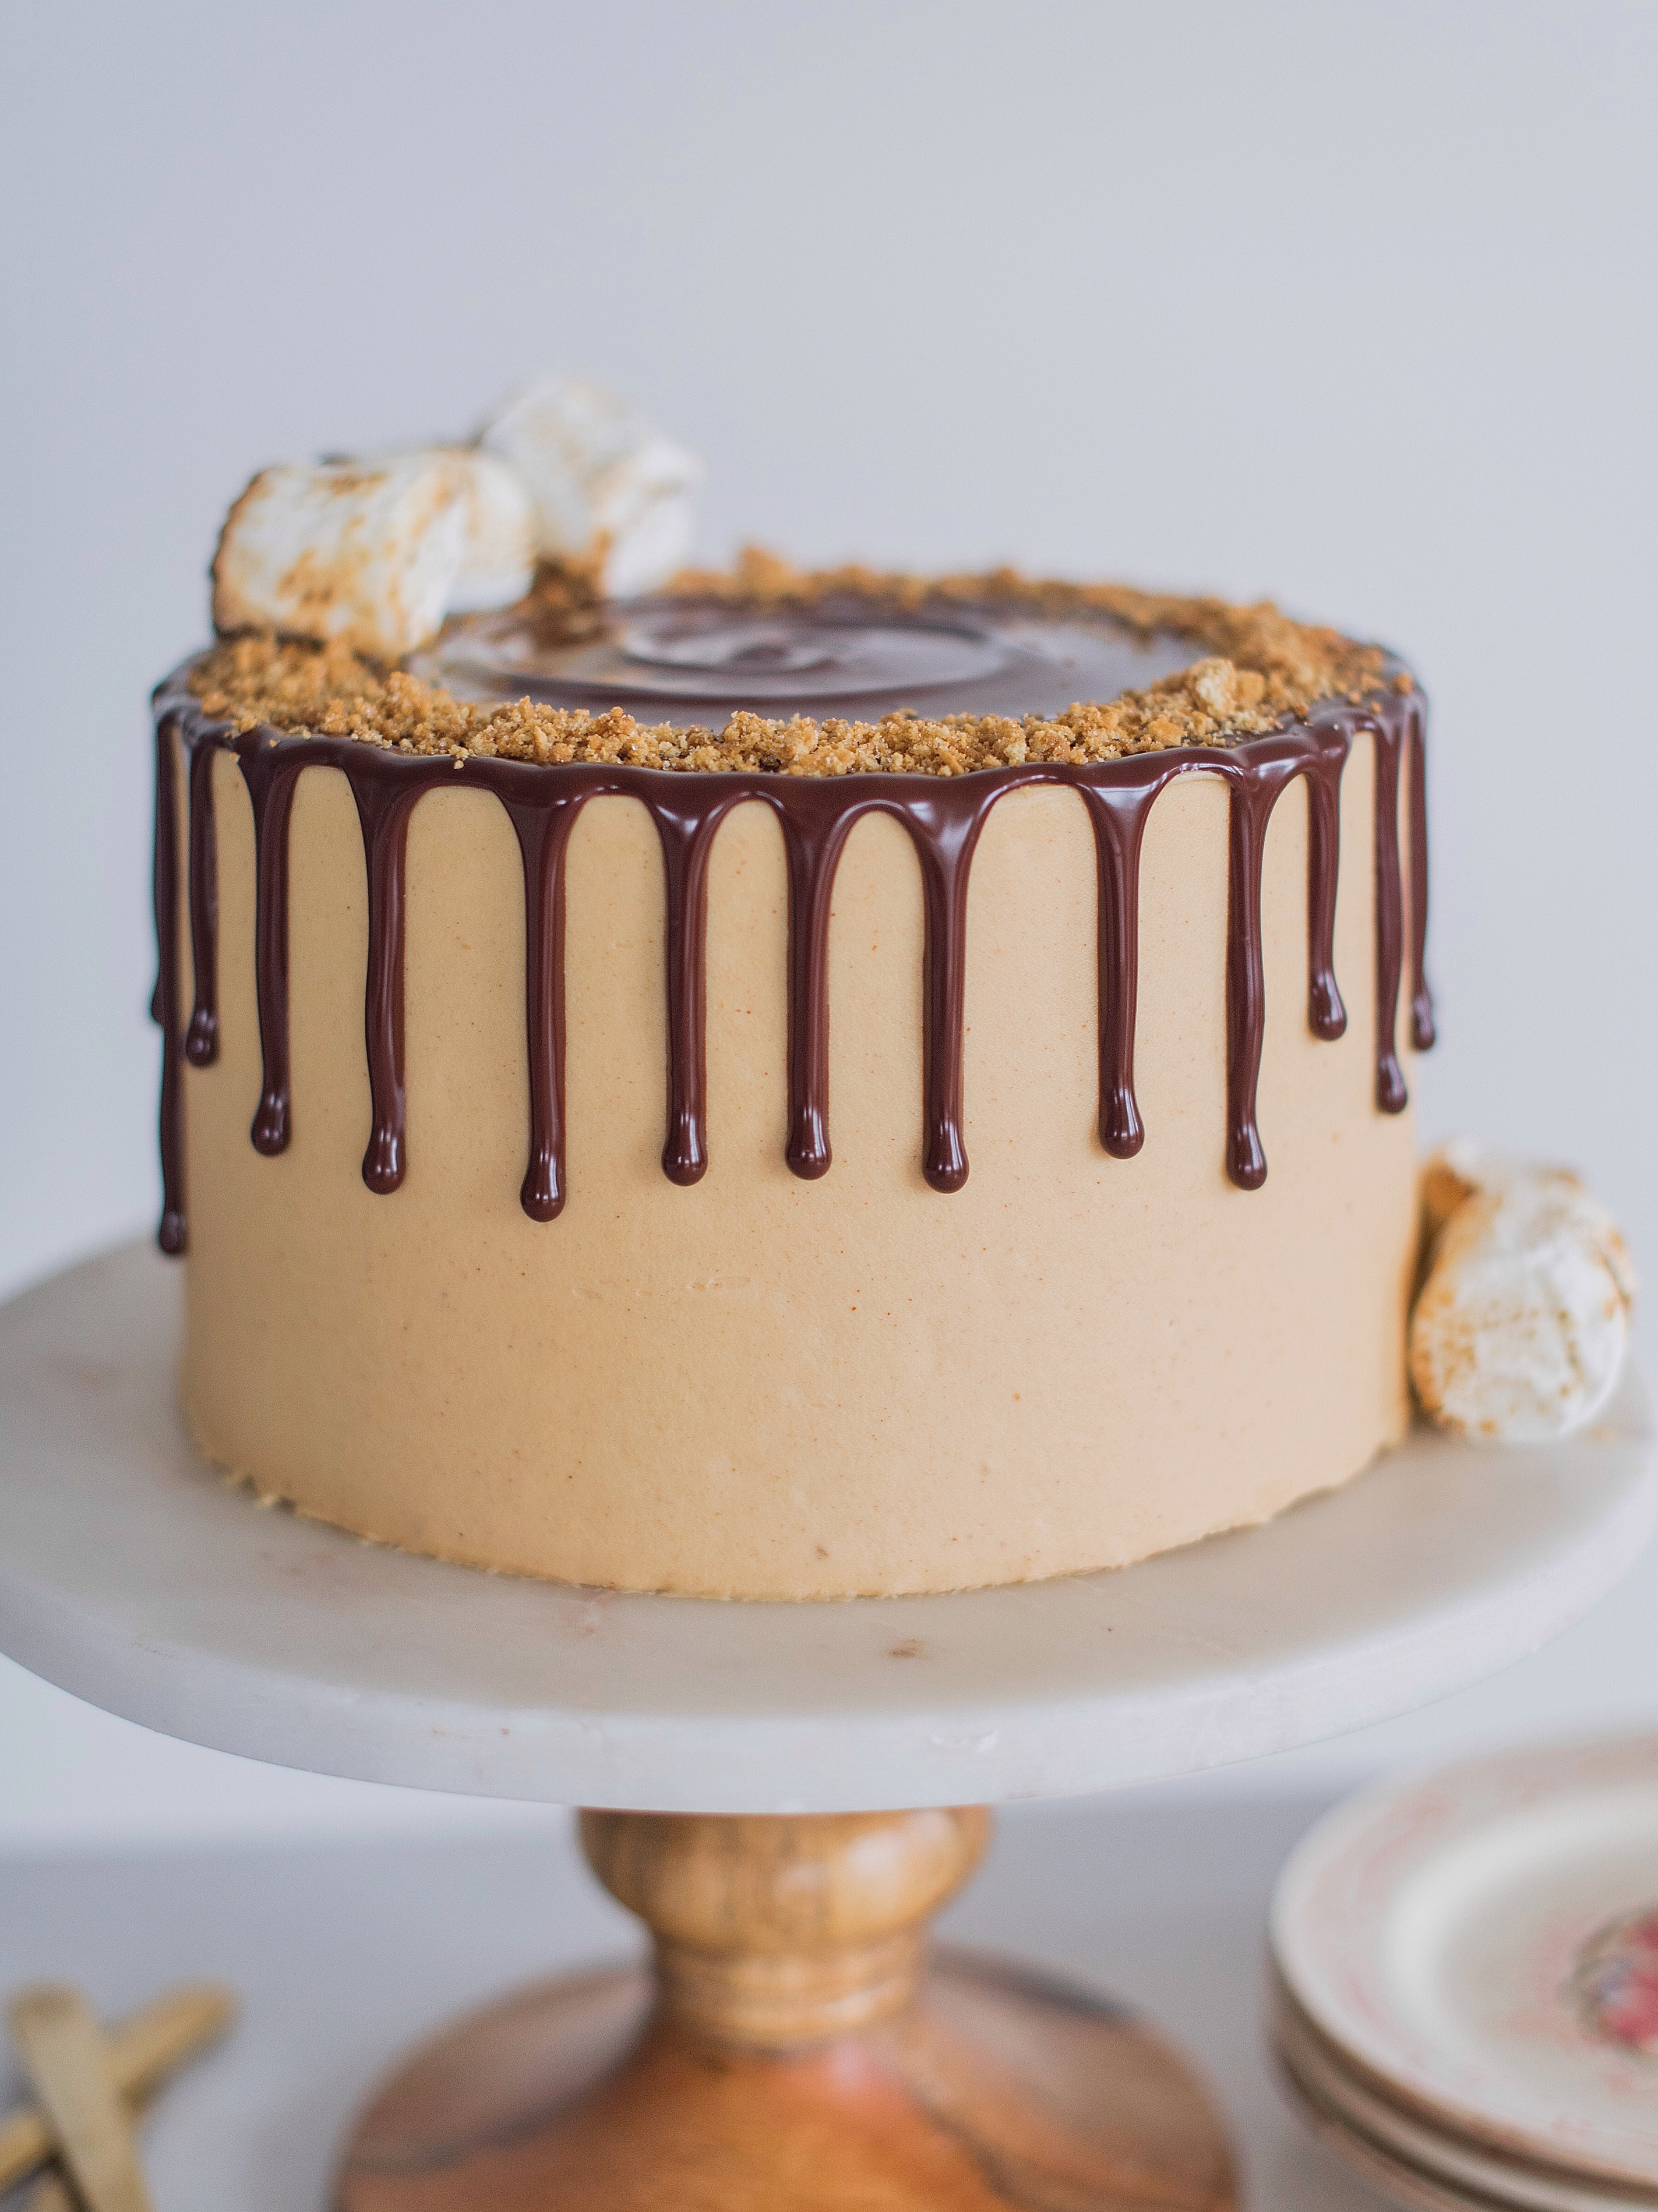 Peanut Butter S'mores Cake on a cake stand.